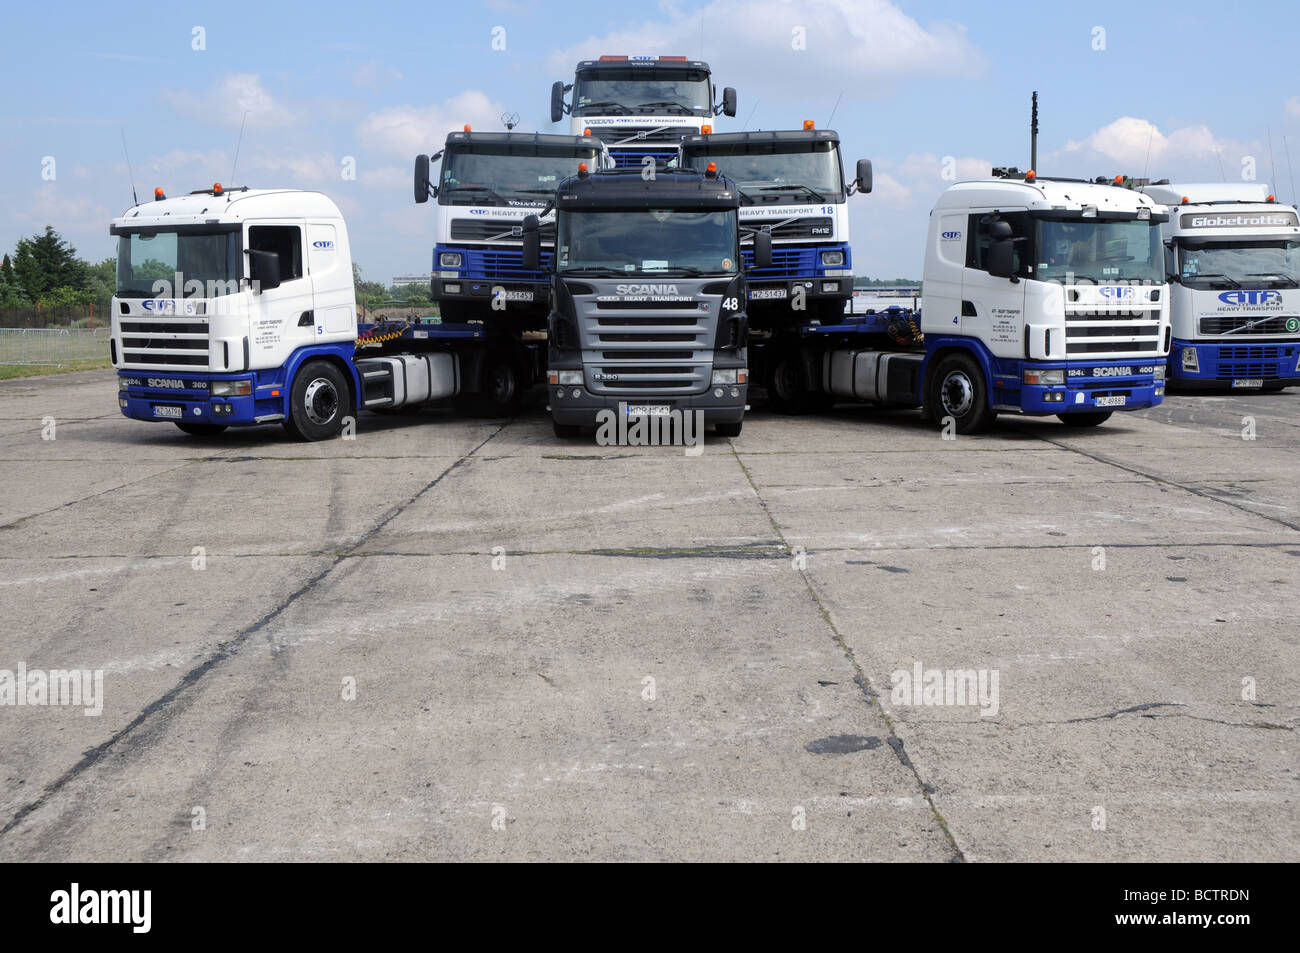 Scania fm12 and r380 and 360 trucks during Men's Day show in Warsaw, Poland Stock Photo